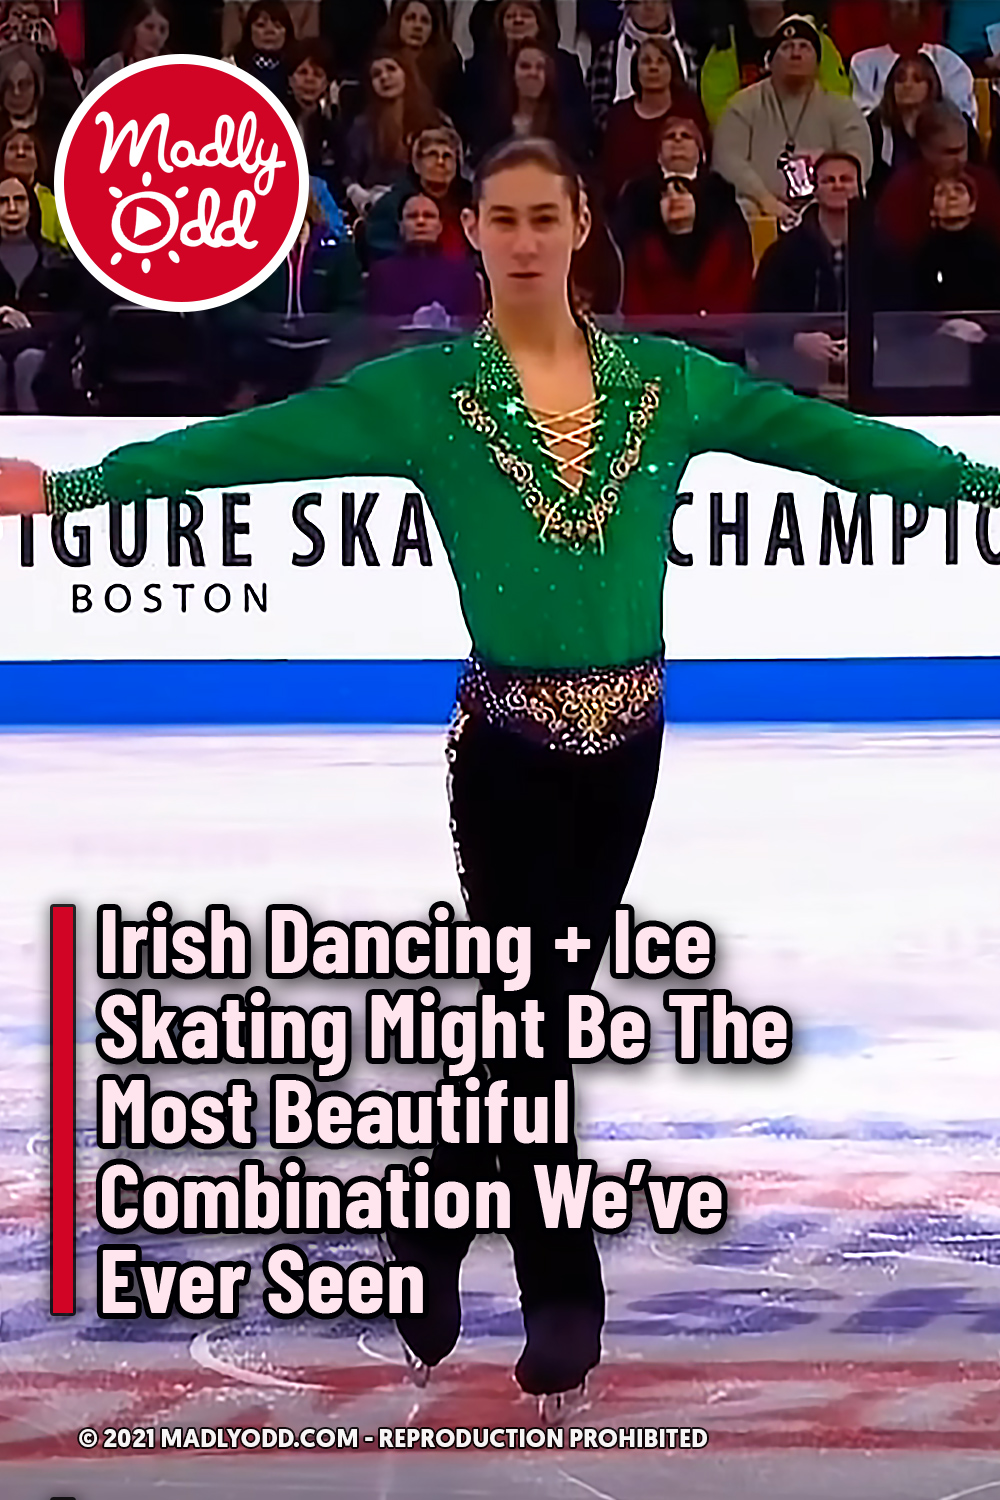 Irish Dancing + Ice Skating Might Be The Most Beautiful Combination We’ve Ever Seen